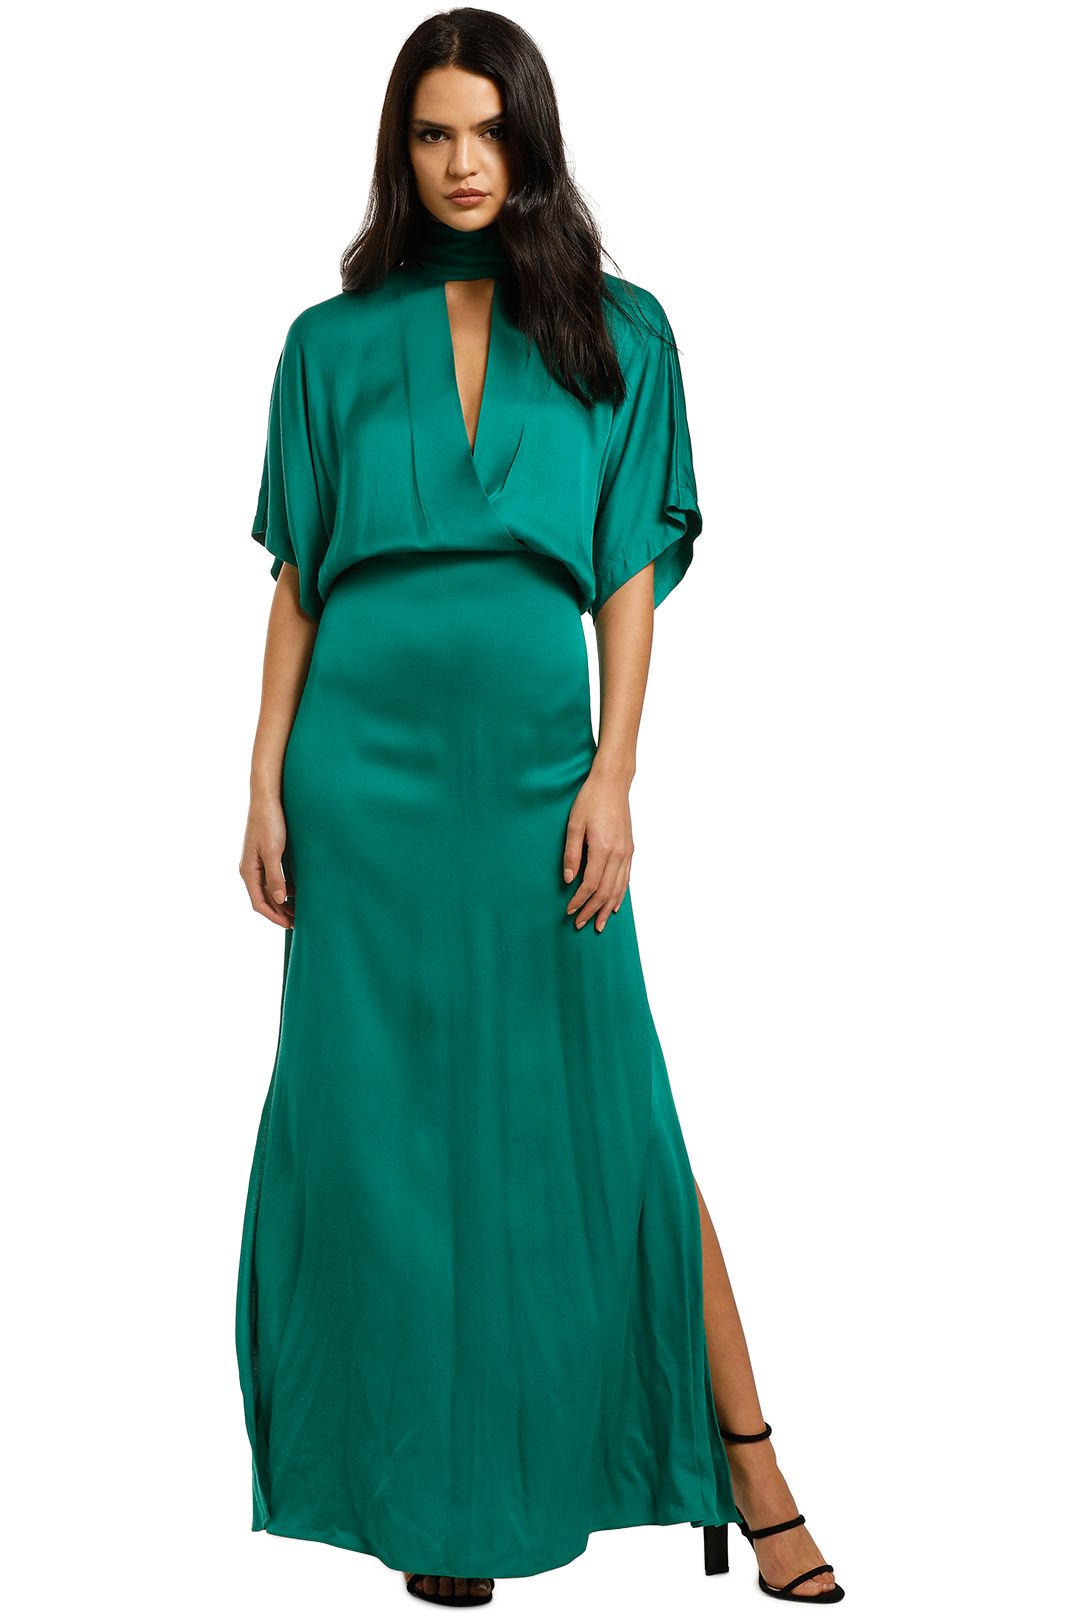 Ginger-and-Smart-Bliss-Gown-Jade-Green-Front